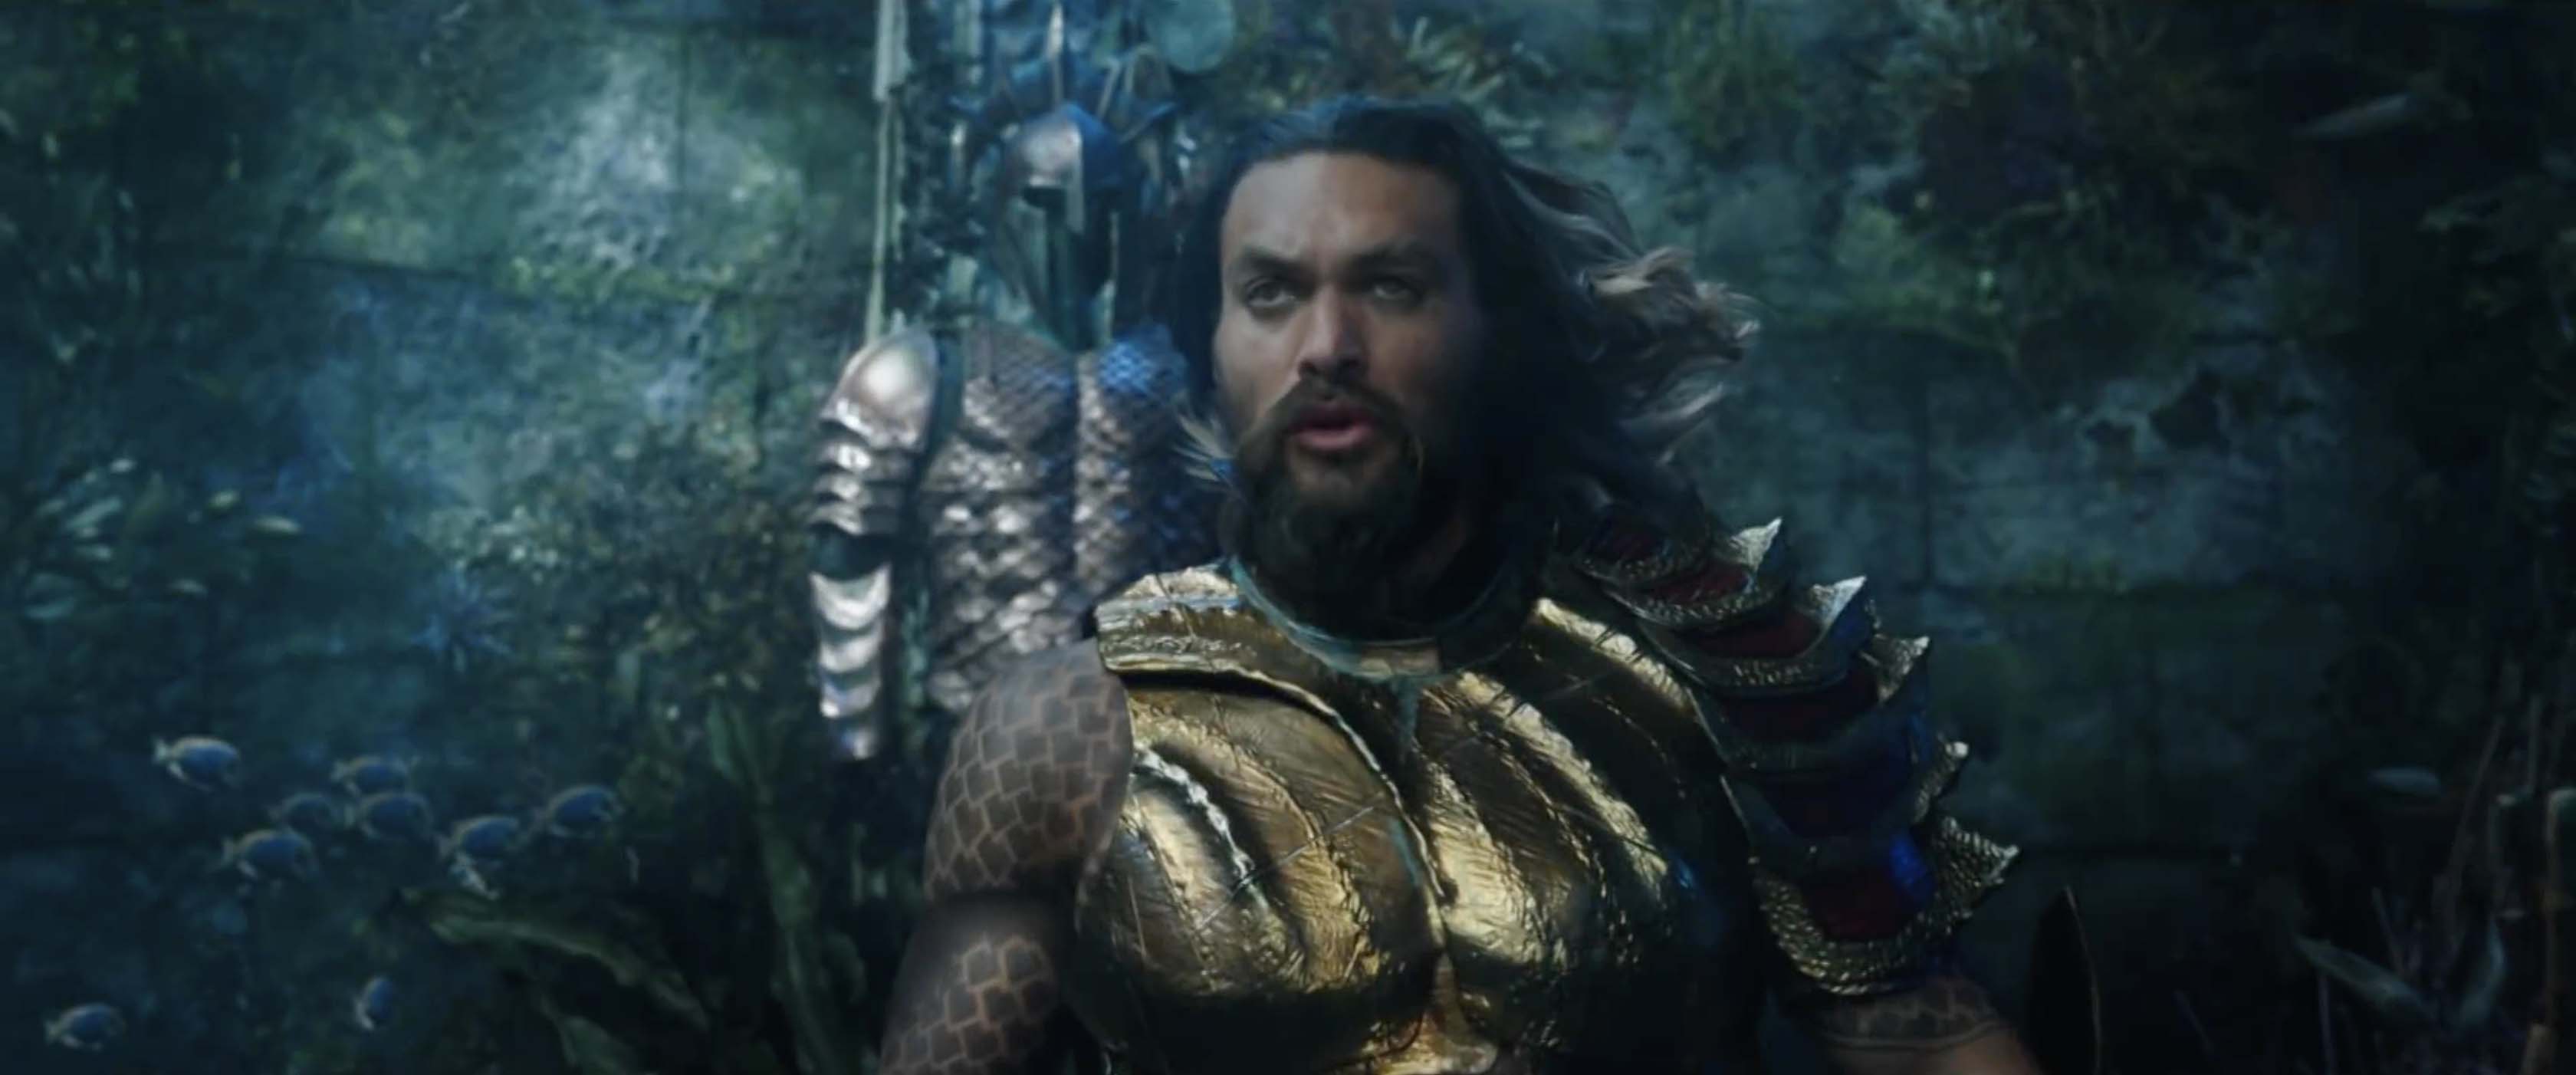 Aquaman Trailer - Our First Look at the King of the Seven 